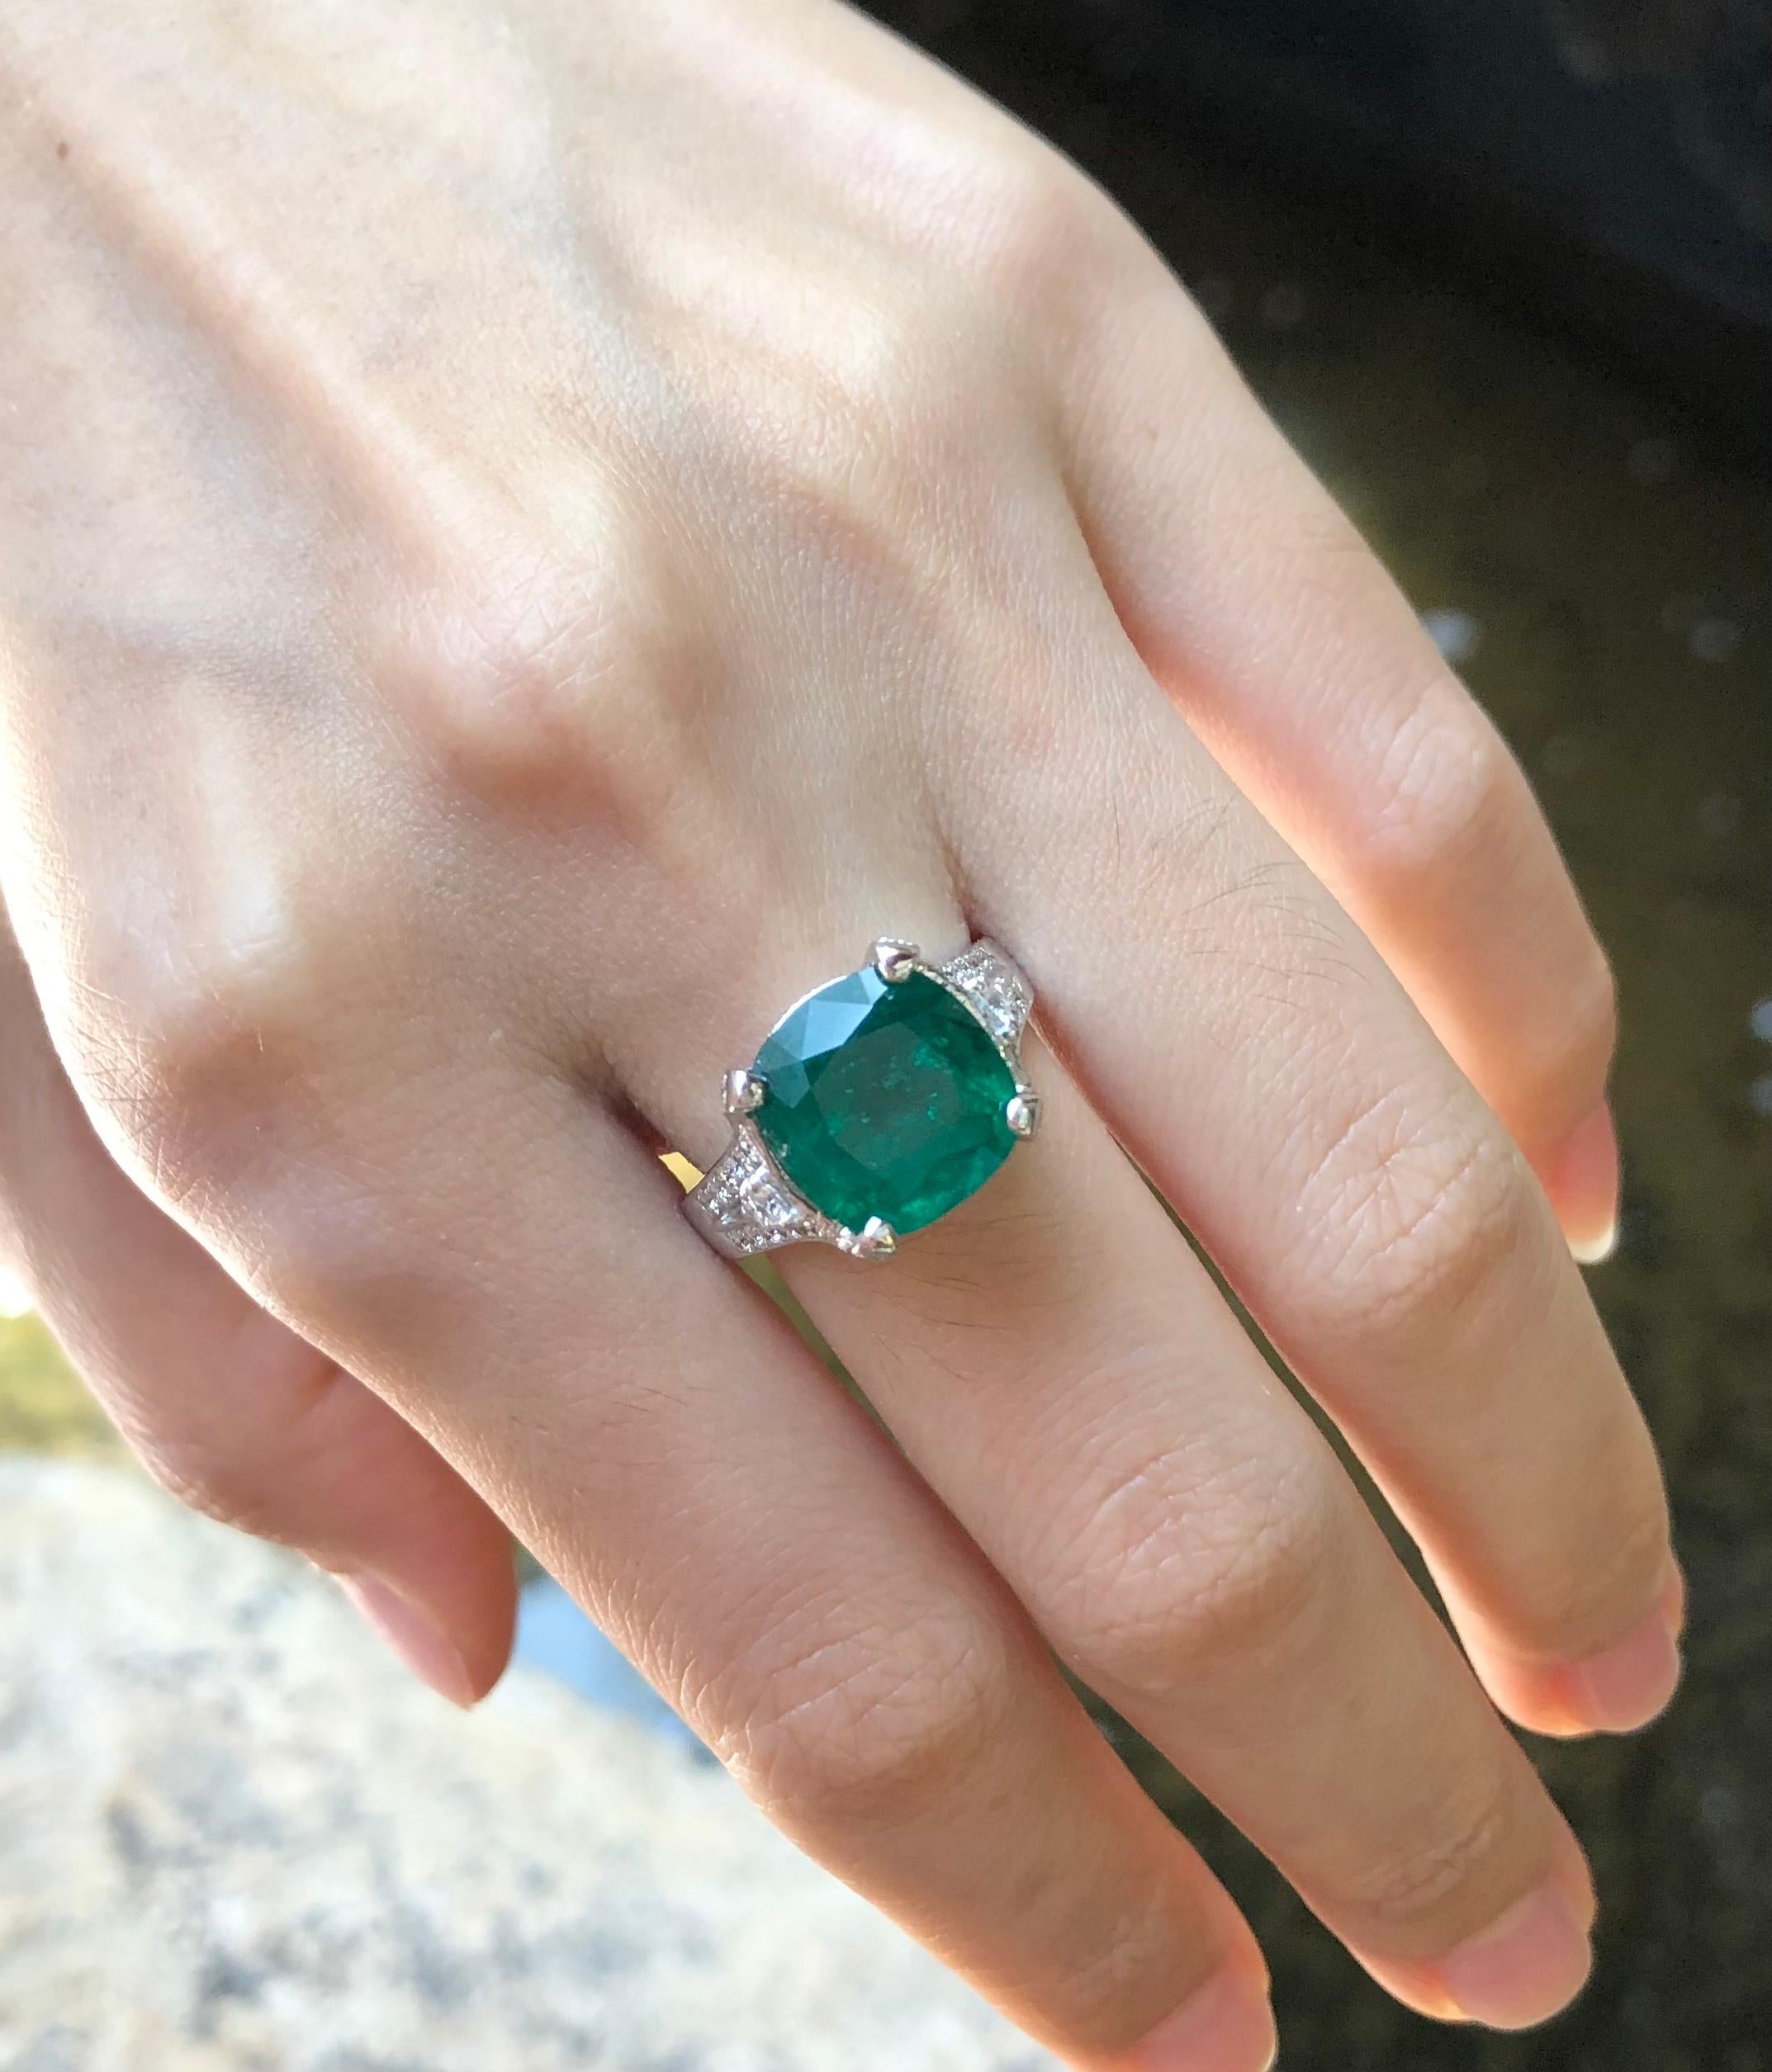 Emerald 4.33 carats with Diamond 0.75 carat Ring set in 18 Karat White Gold Settings

Width:  1.2 cm 
Length:  1.2 cm
Ring Size: 57
Total Weight: 7.55 grams

